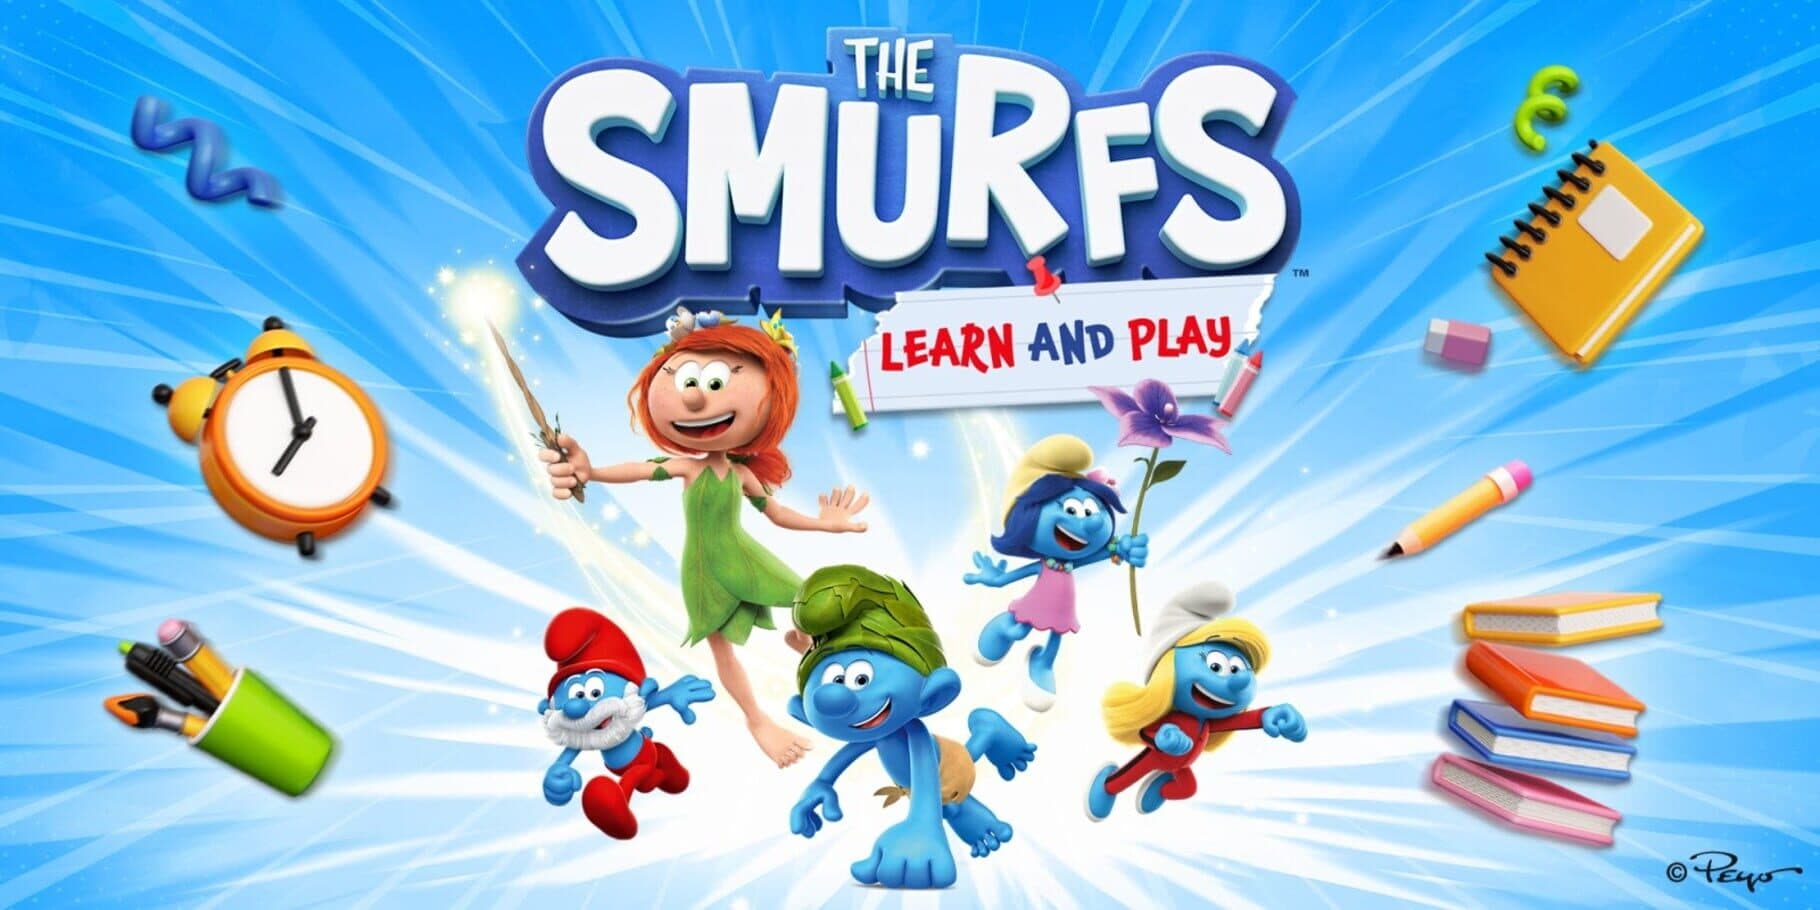 The Smurfs: Learn and Play Image